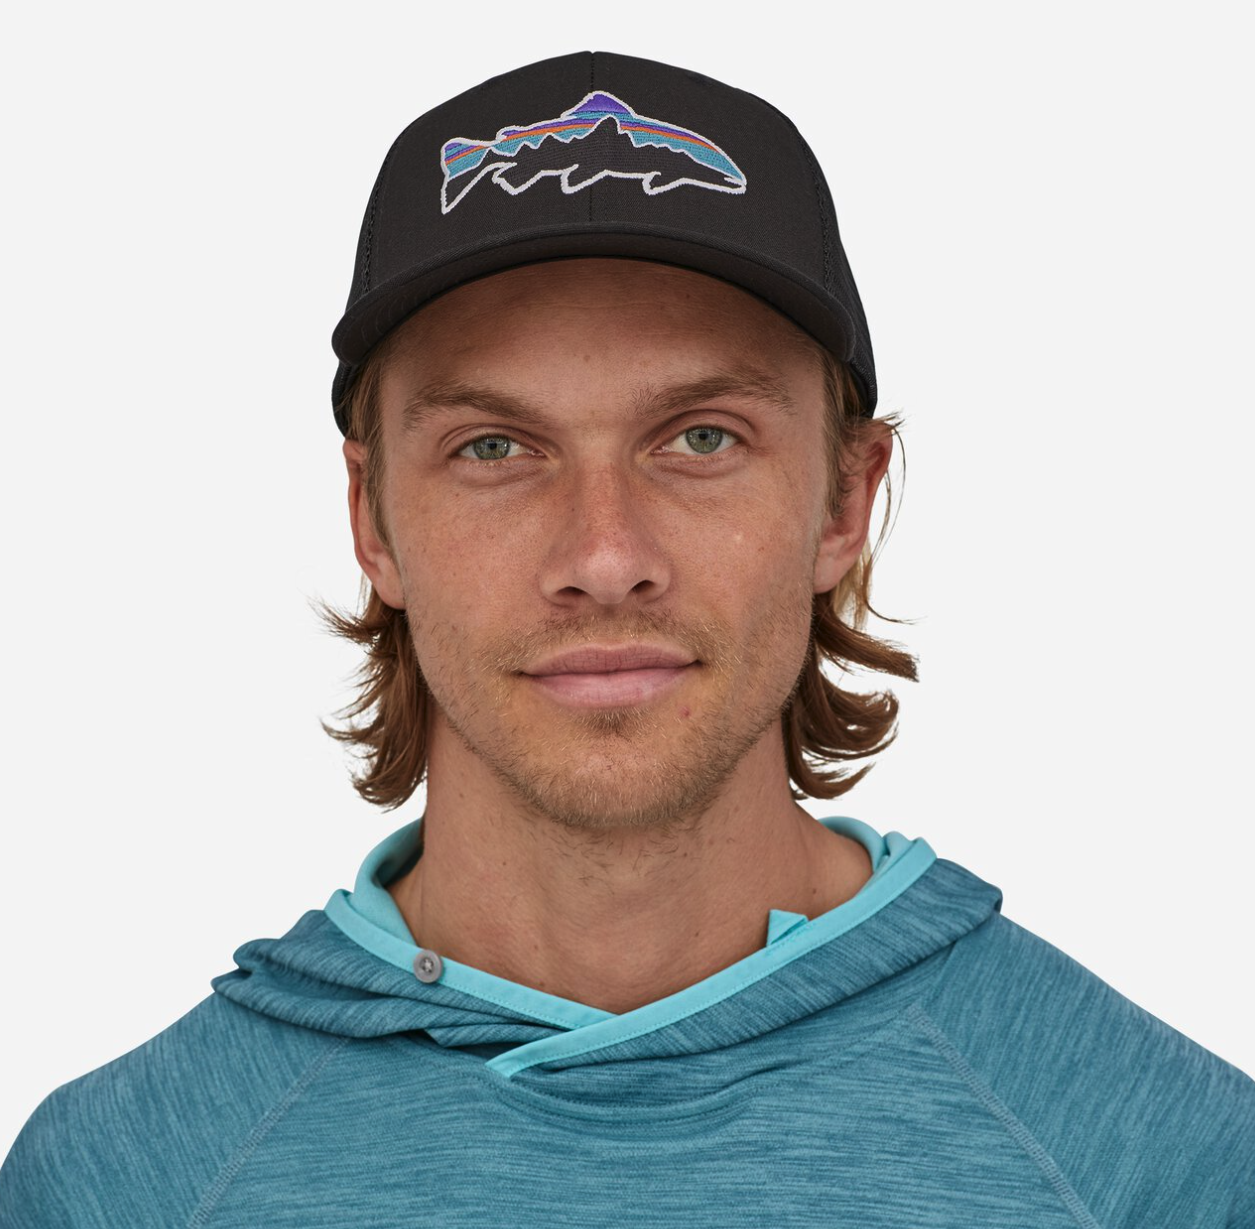 Patagonia Fitz Roy Trout Trucker Hat | Buy Patagonia Fly Fishing Hats ...